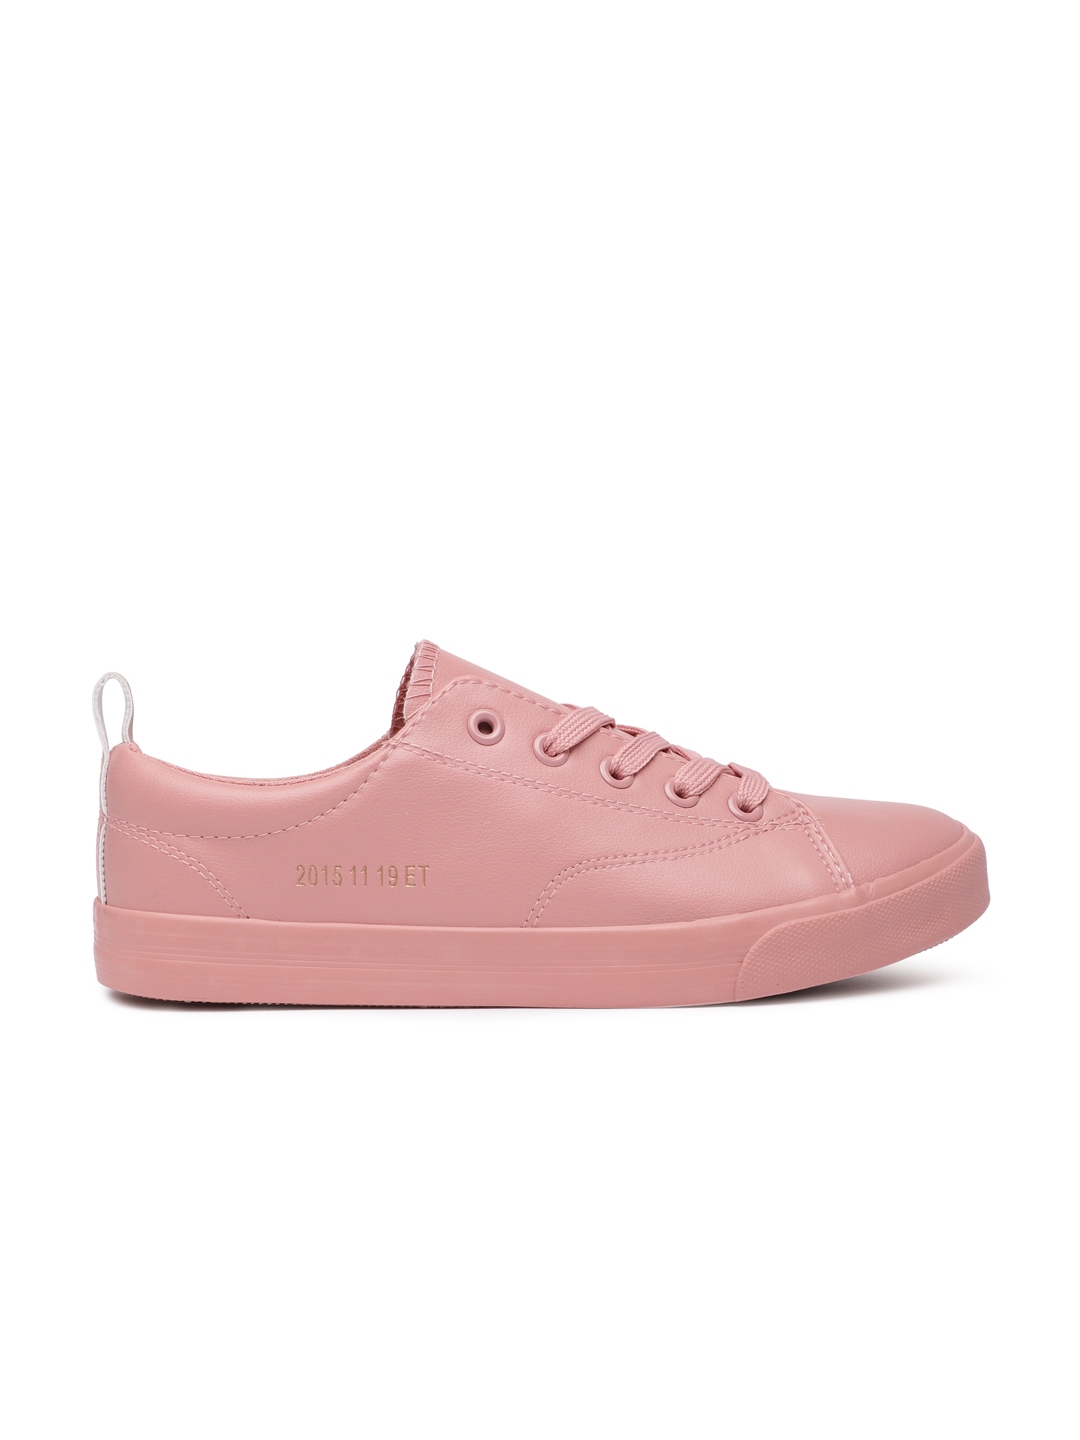 Pink Sneakers - Casual Shoes for Women 